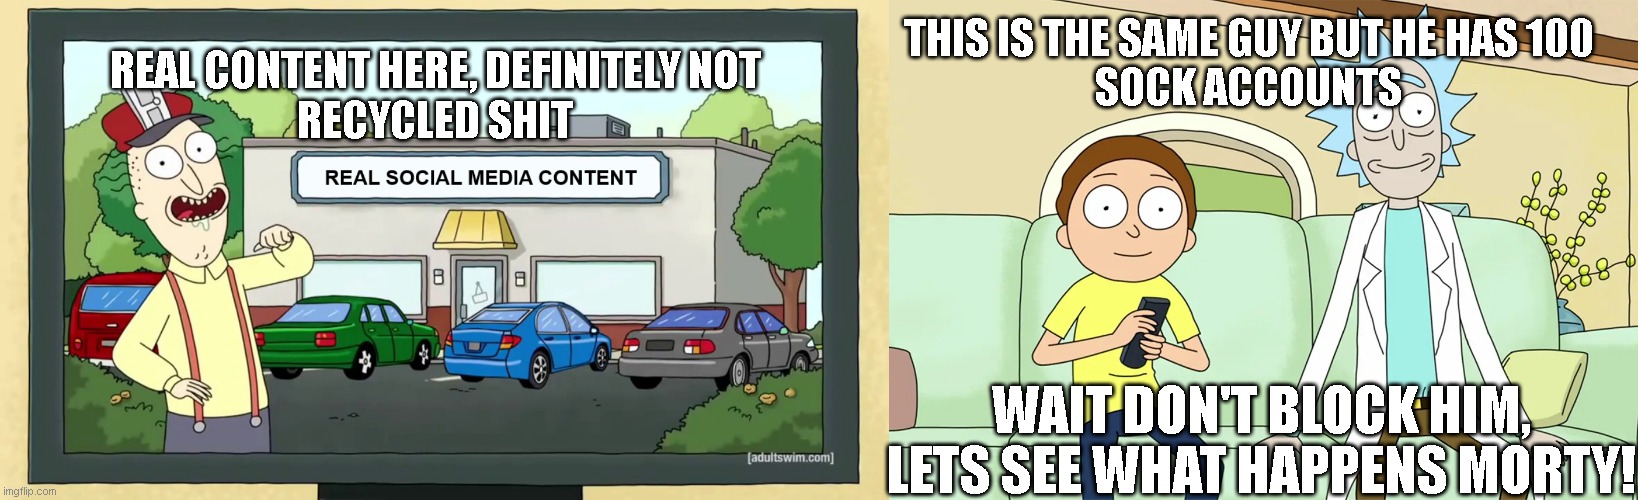 real content here! | THIS IS THE SAME GUY BUT HE HAS 100
SOCK ACCOUNTS; REAL CONTENT HERE, DEFINITELY NOT
RECYCLED SHIT; WAIT DON'T BLOCK HIM, LETS SEE WHAT HAPPENS MORTY! | image tagged in real content,original content,recycled | made w/ Imgflip meme maker